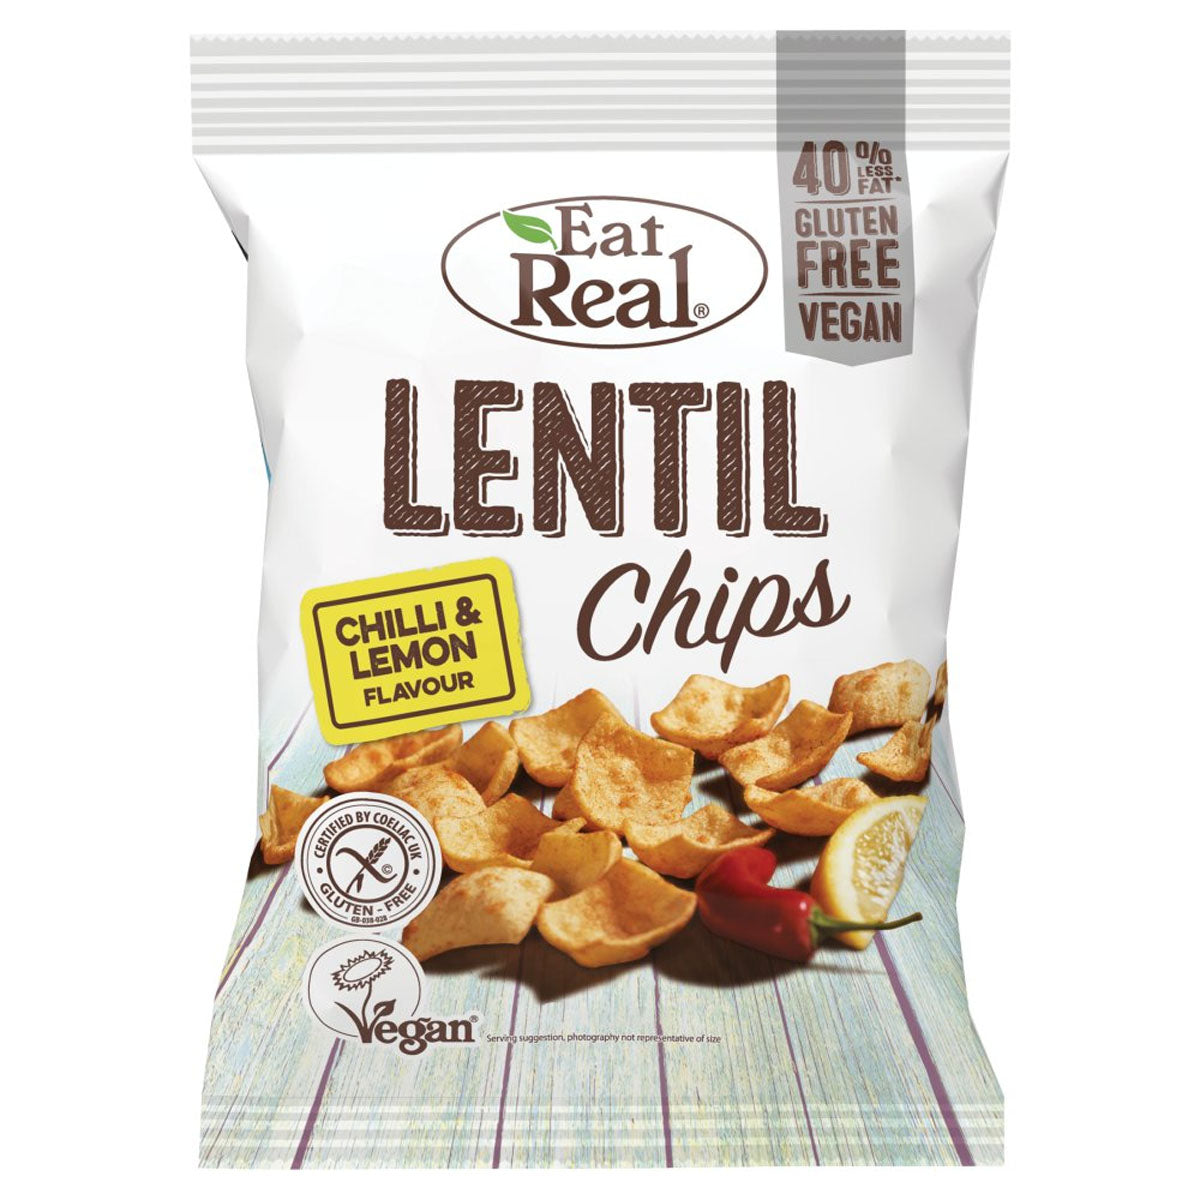 Eat Real - Lentil Chips Chilli and Lemon Flavour - 40g - Continental Food Store